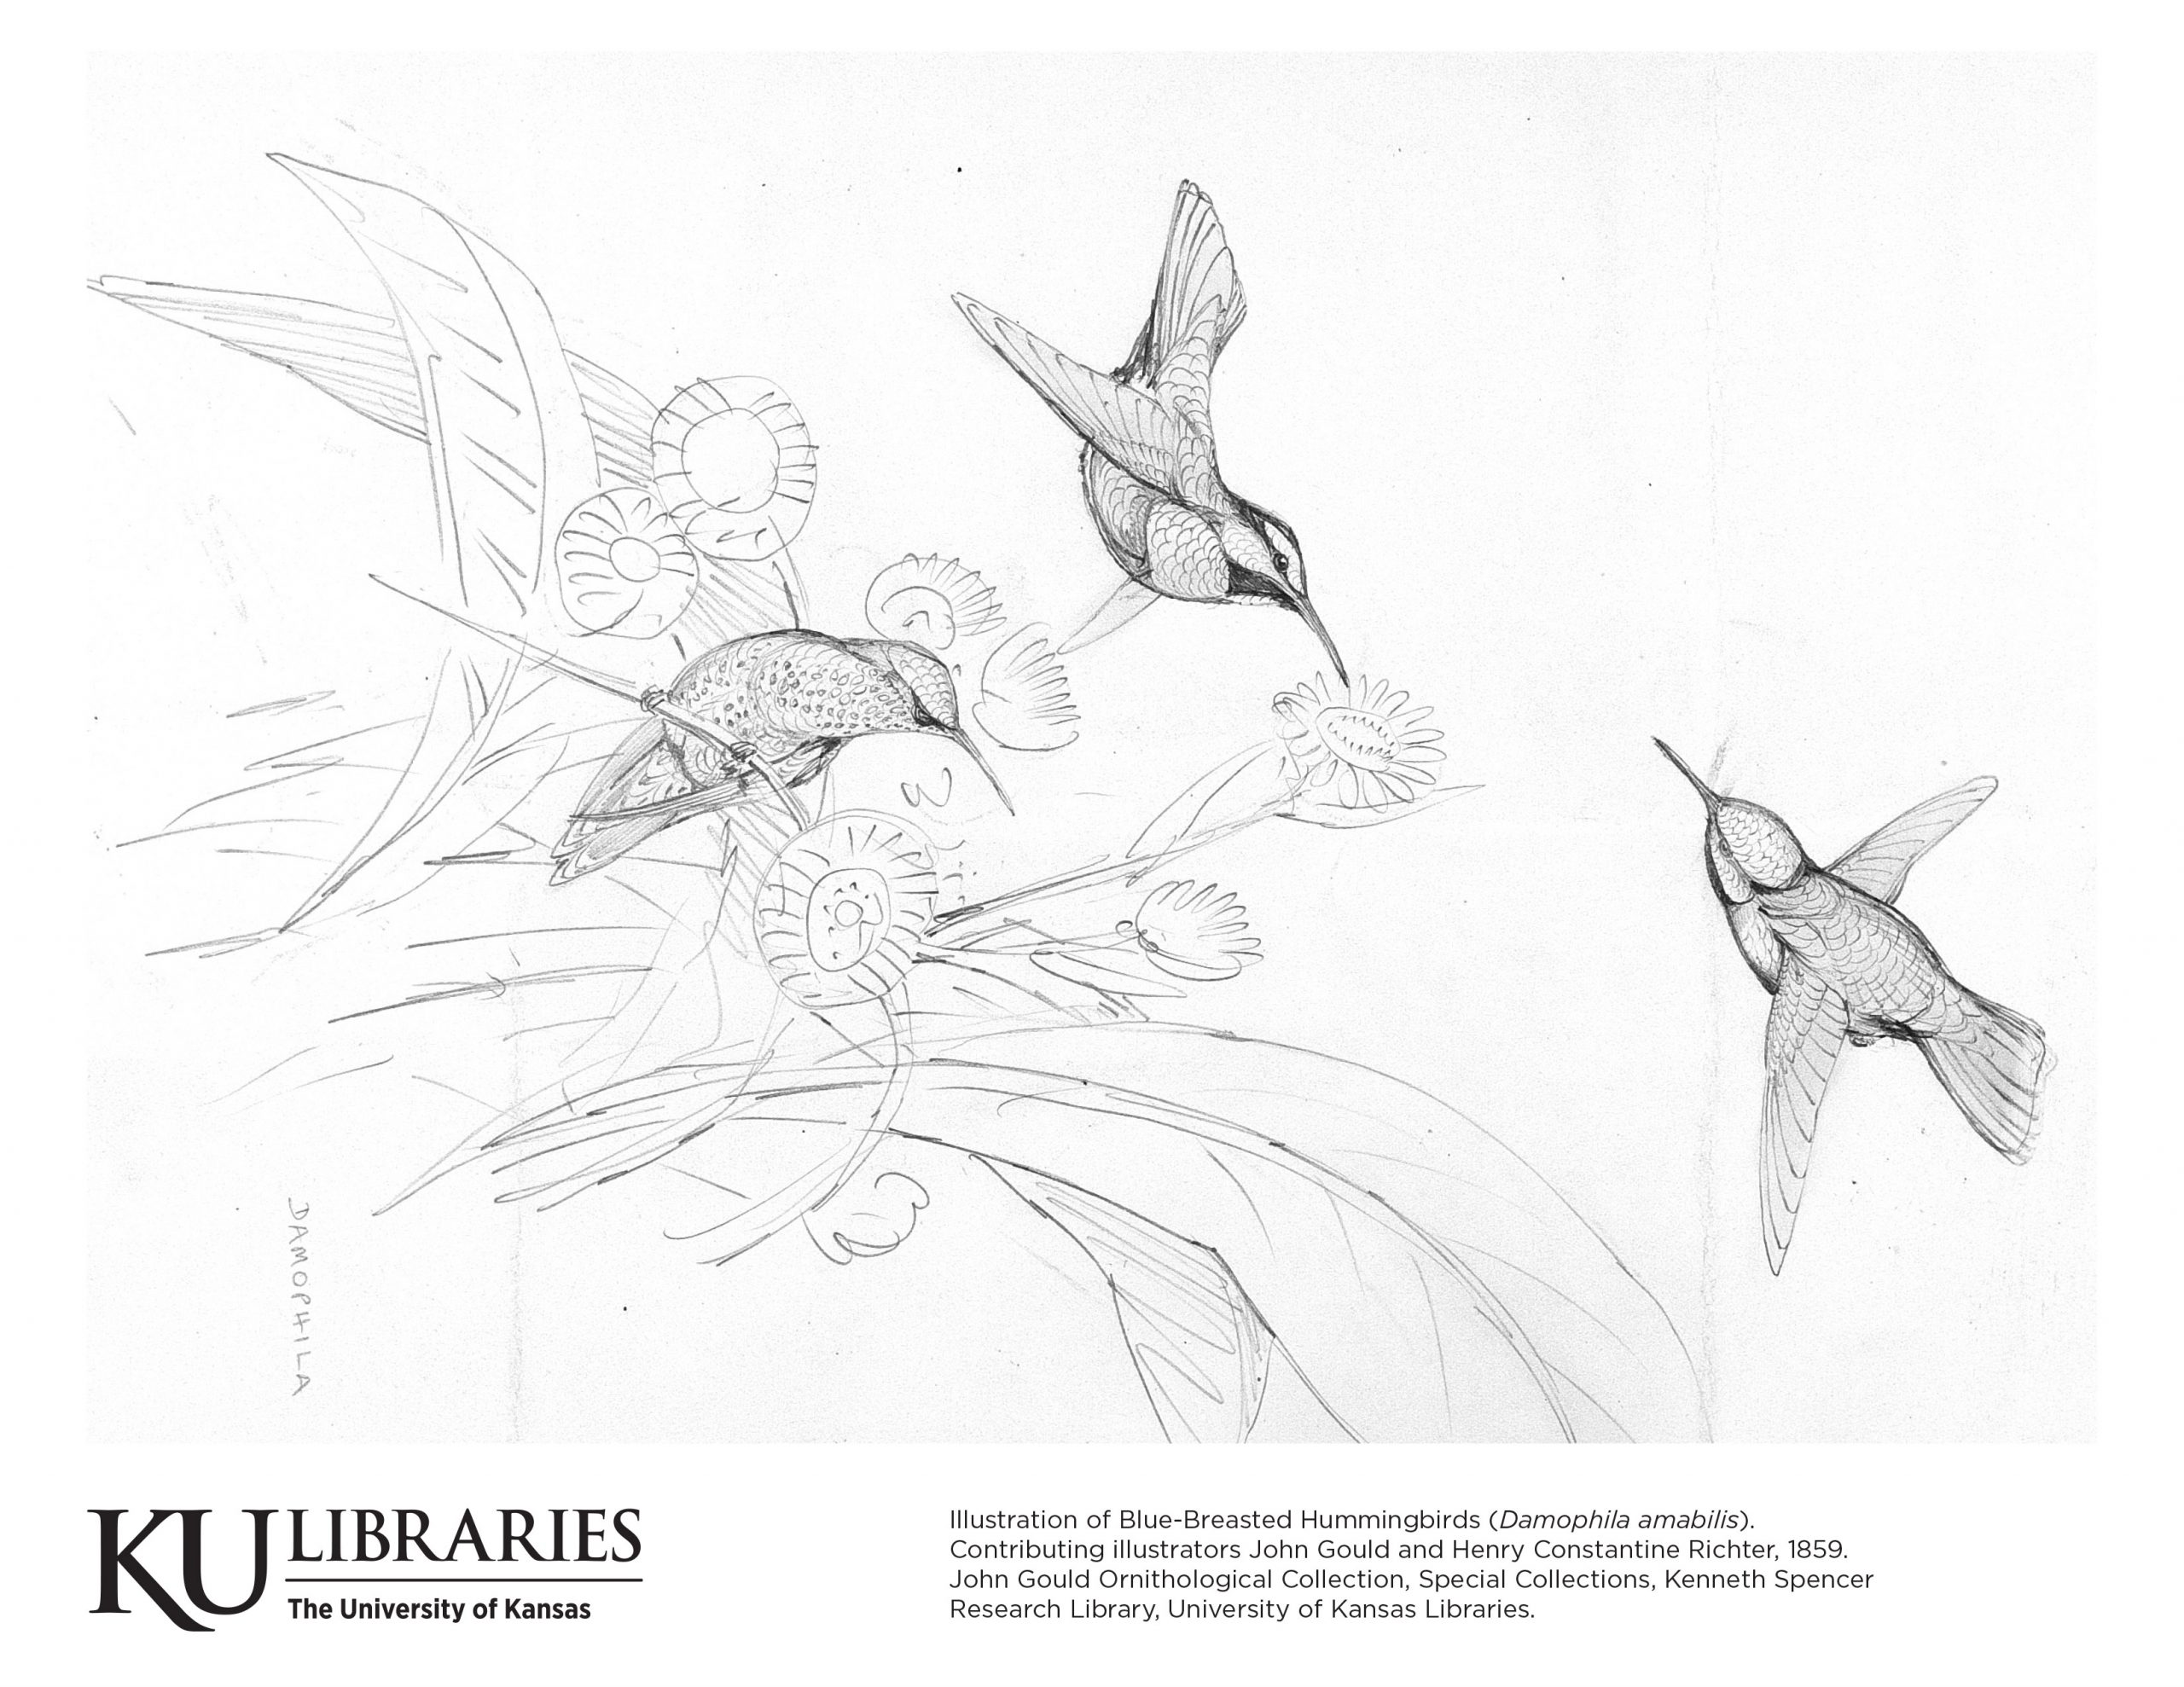 Kenneth Spencer Research Library Blog » Bird drawings pic